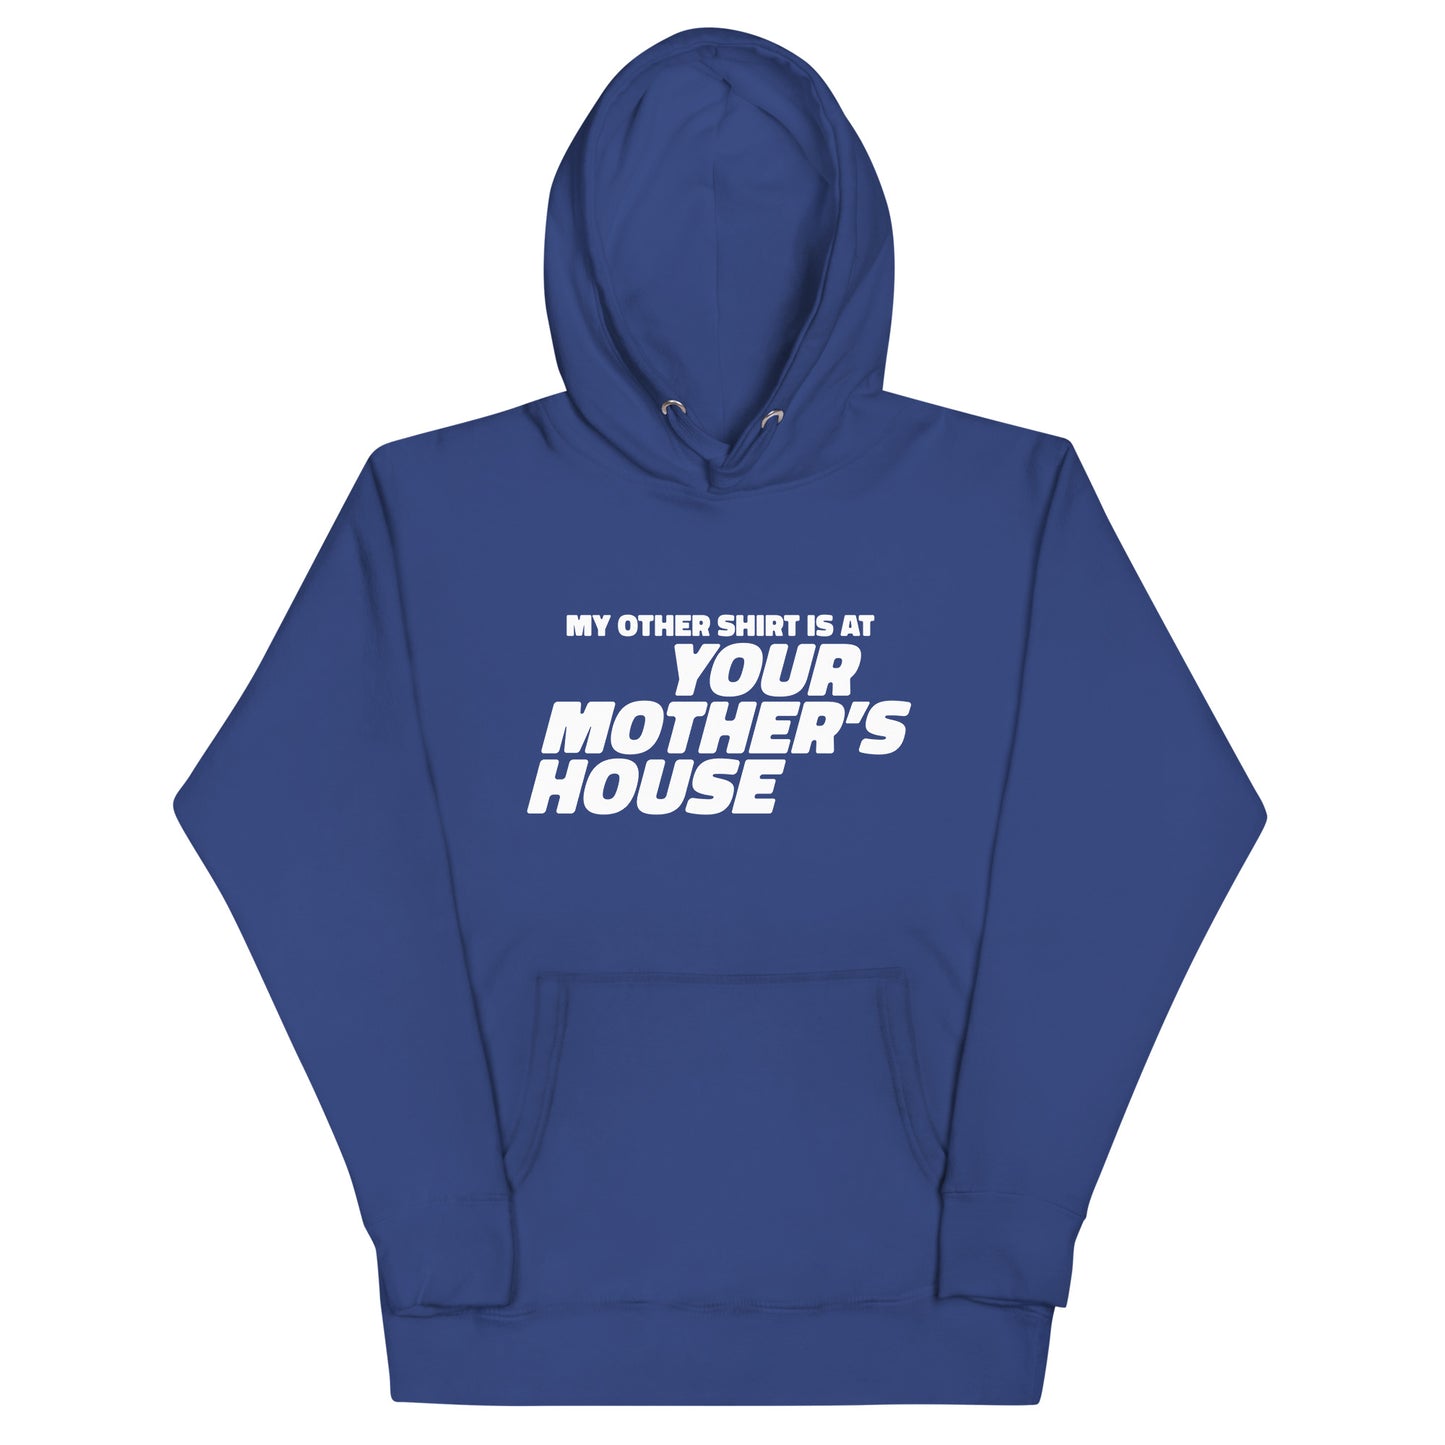 My Other Shirt is at Your Mother's House Unisex Hoodie